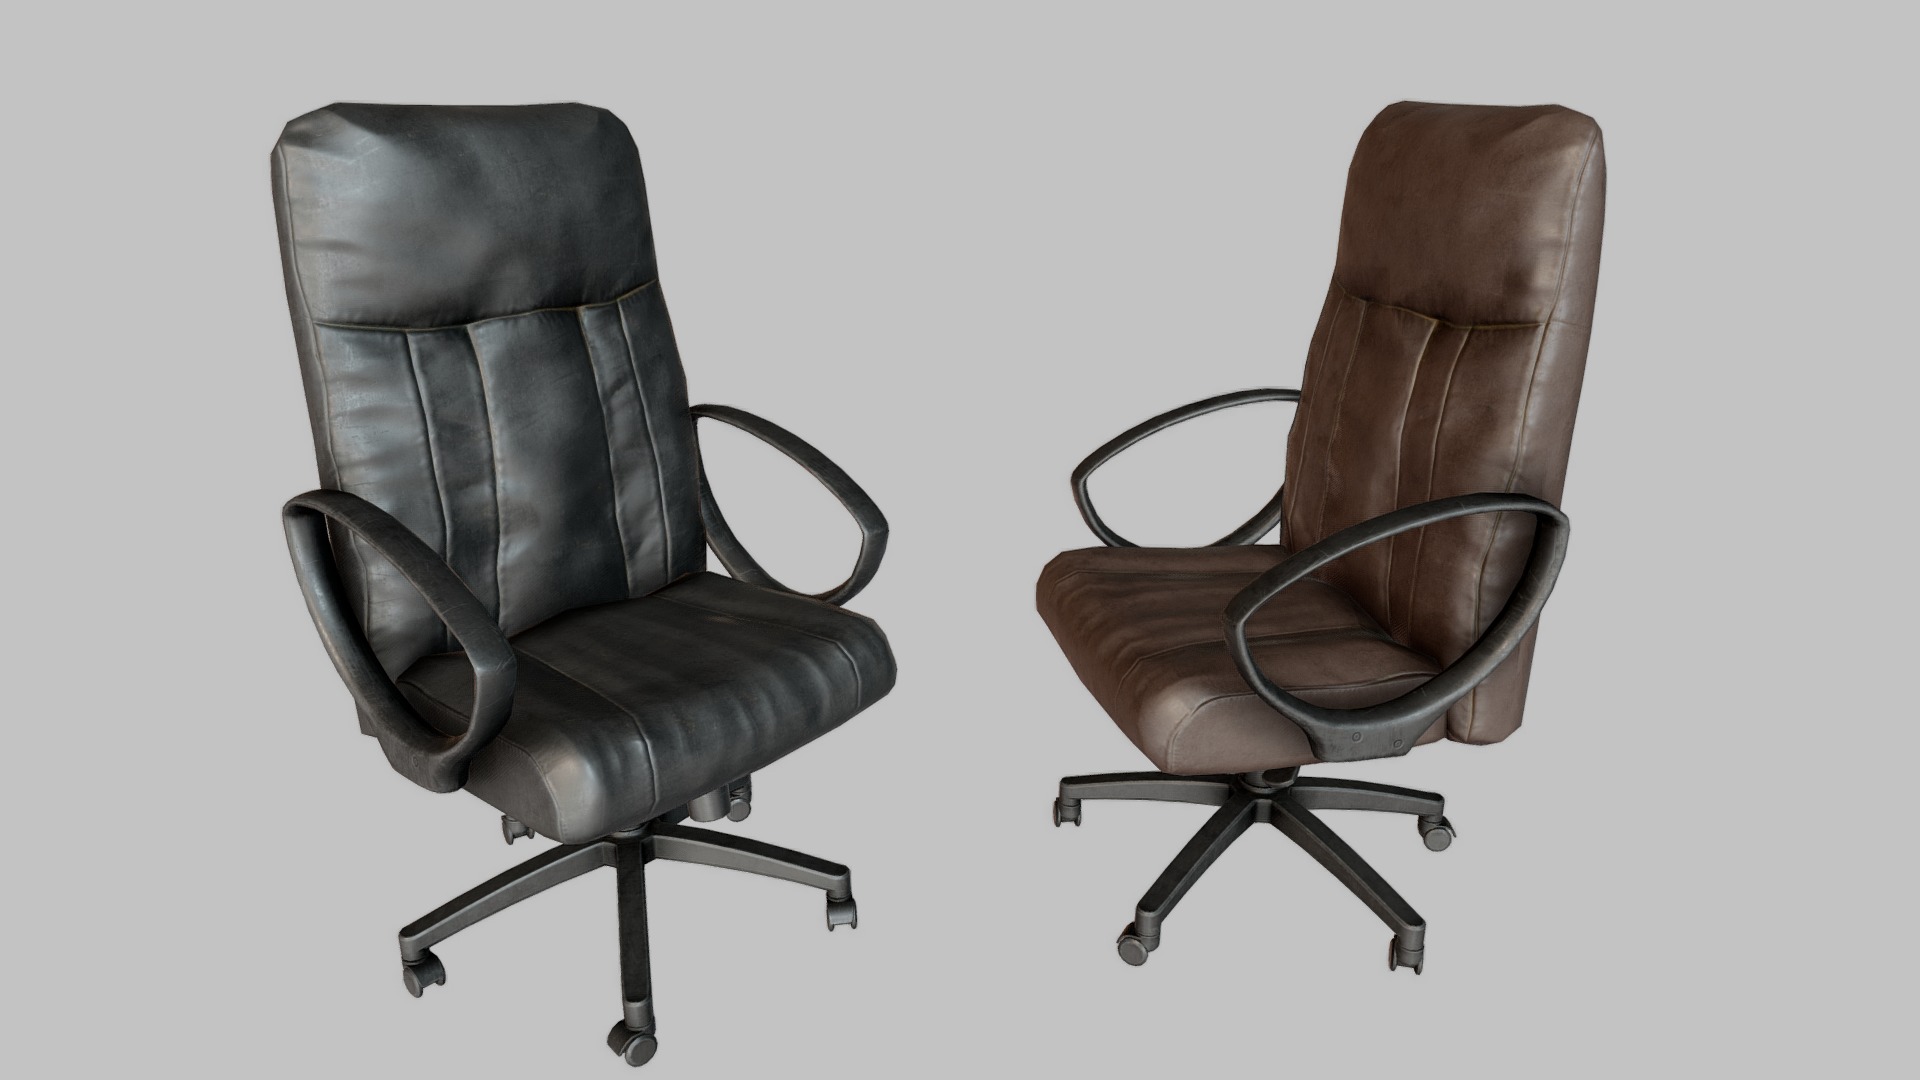 3D model Old Office Chair PBR - This is a 3D model of the Old Office Chair PBR. The 3D model is about a pair of black office chairs.